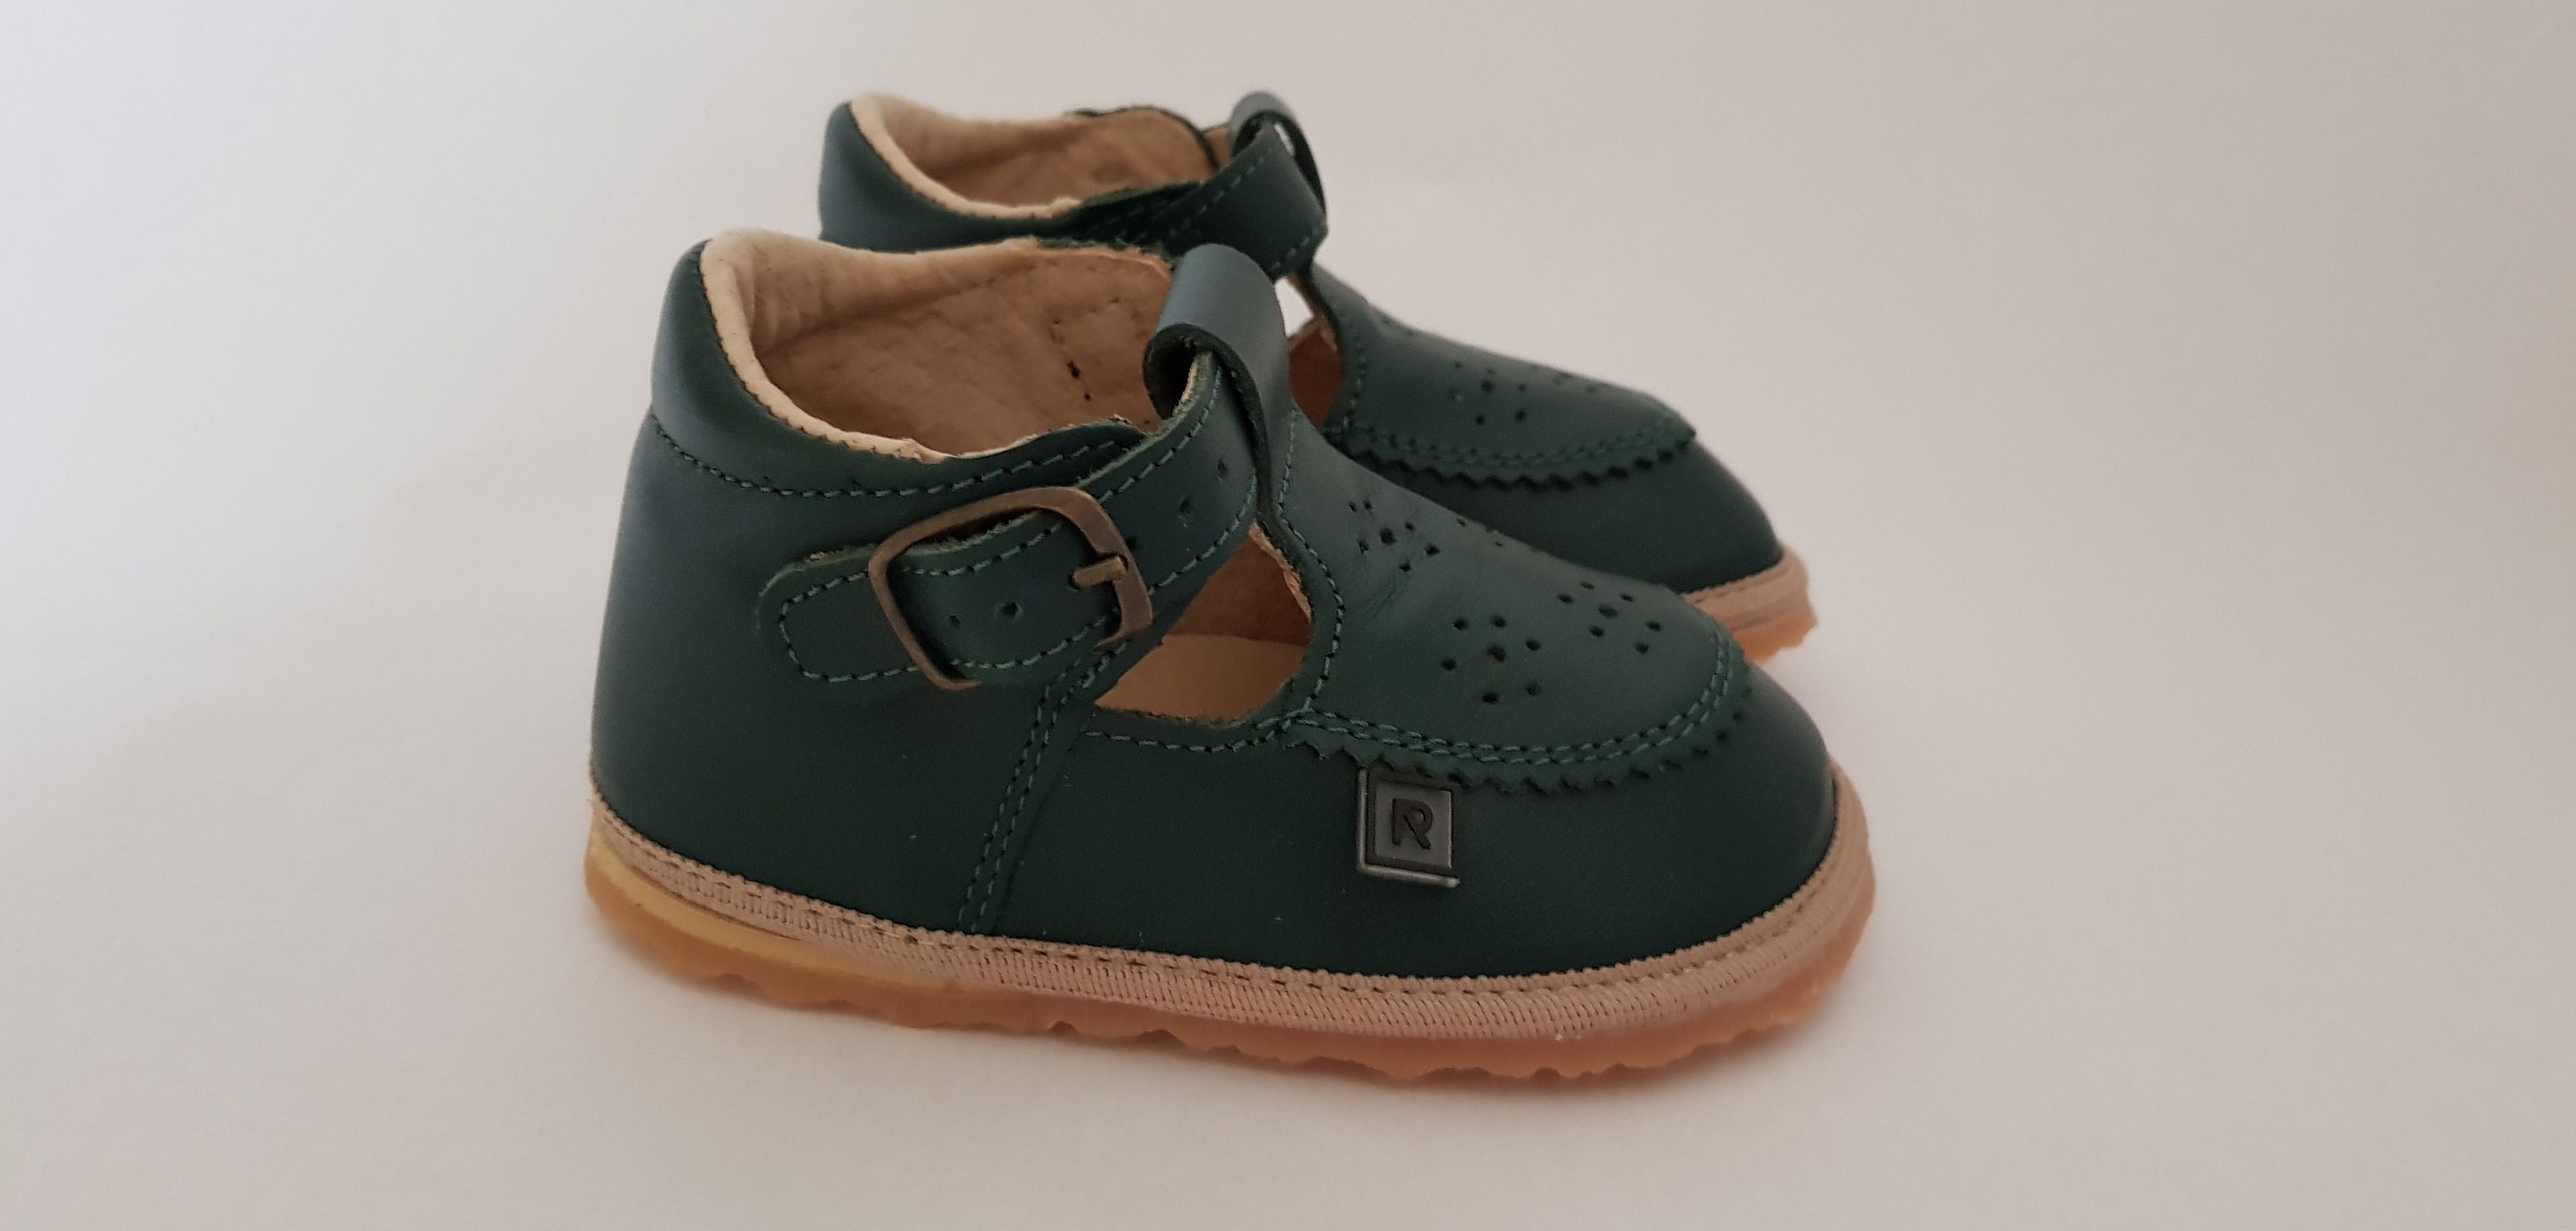 Vintage-style T-bar Dark Green Toddler First Walking Shoes with side Buckle fastening and anatomically shaped toe box